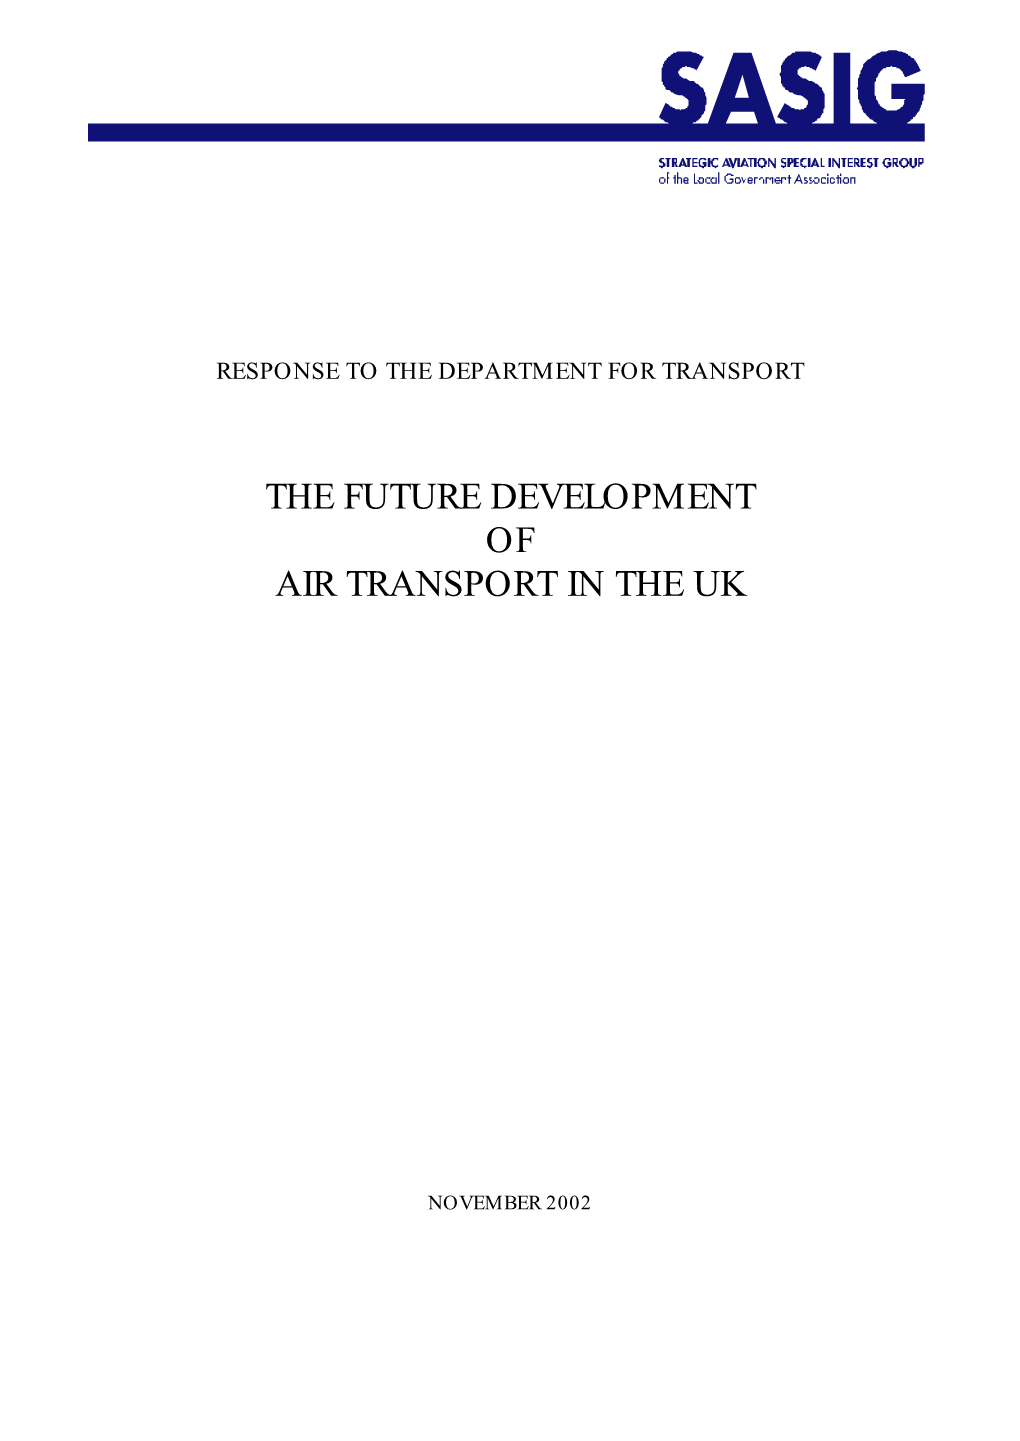 The Future Development of Air Transport in the Uk